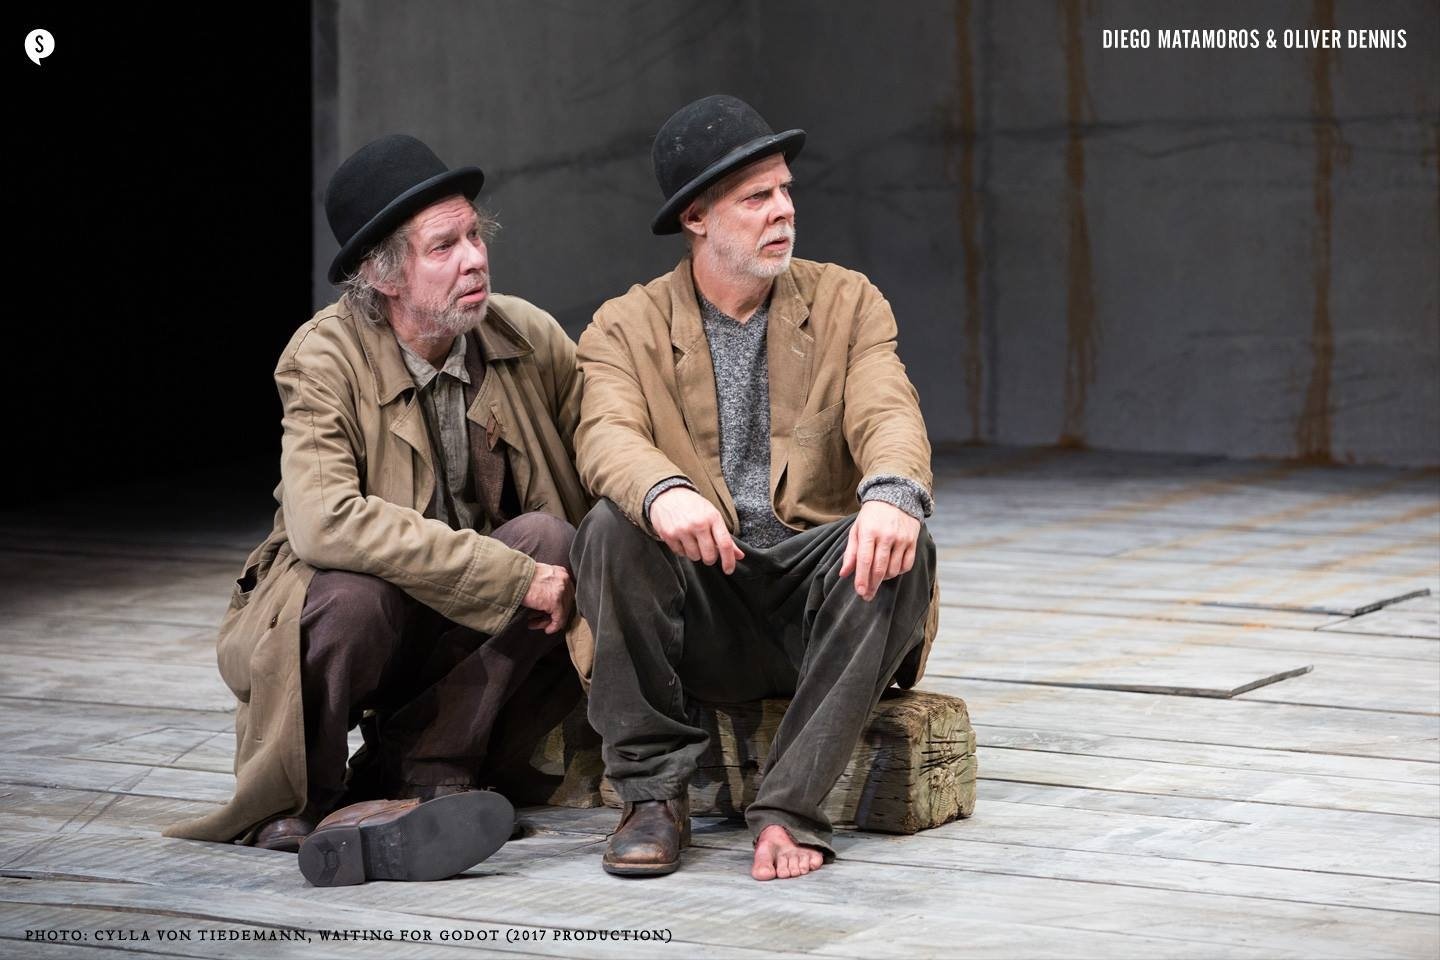   Waiting for Godot.  Soulpepper Theatre. Direction: Daniel Brooks. Costume Design: Michelle Tracey. Photo by: Cylla von Tiedmann 